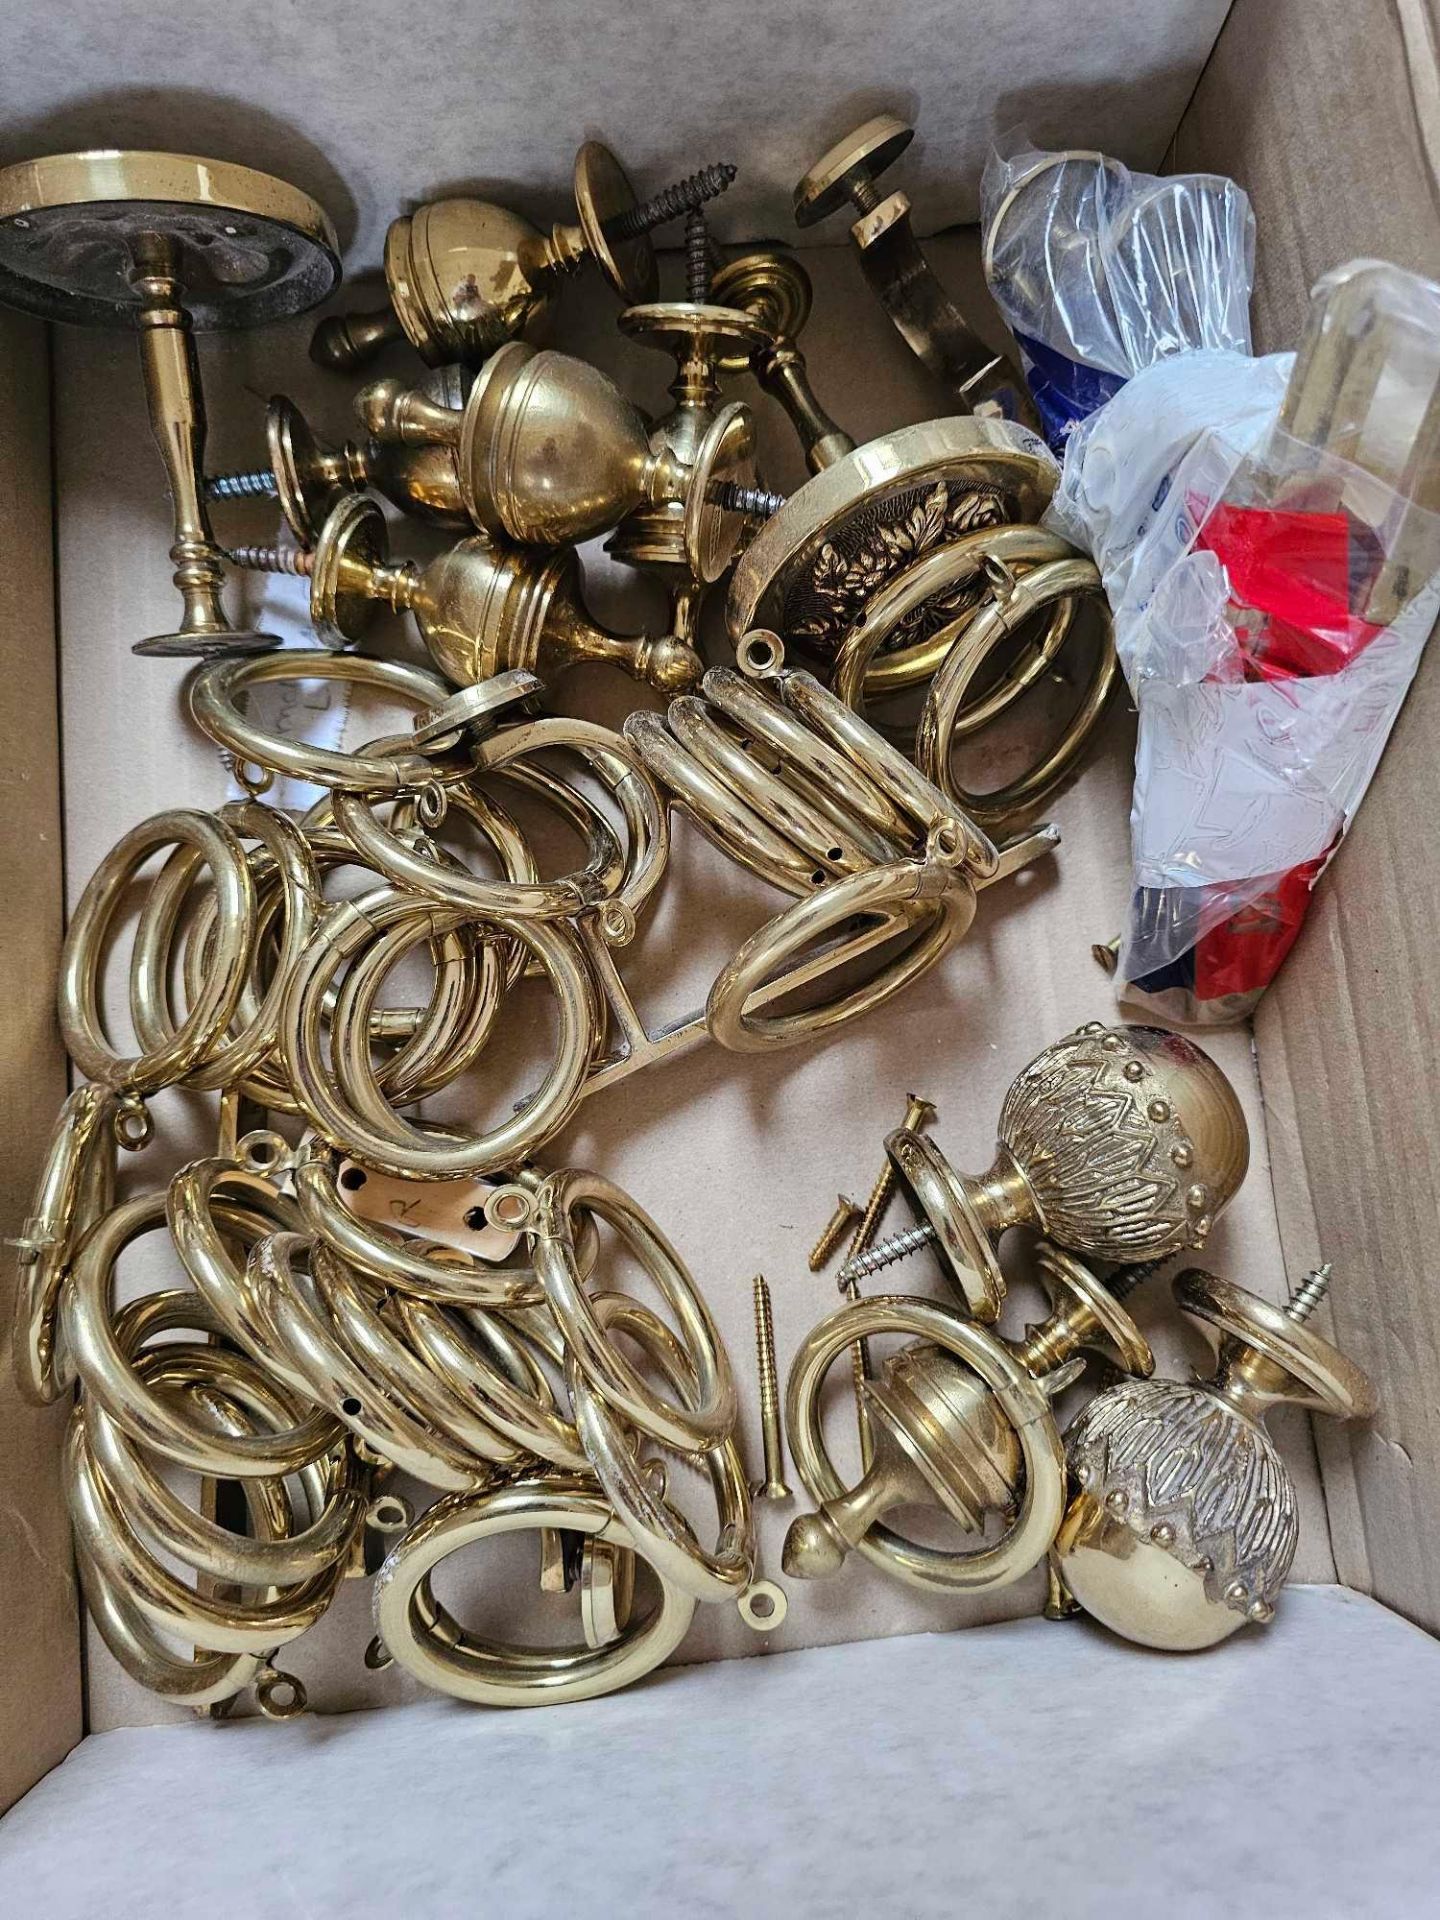 A Quantity Of Various Curtain Fittings Brass And Wood Rings, Finials And A Wooden Drapery Pole As - Image 2 of 4